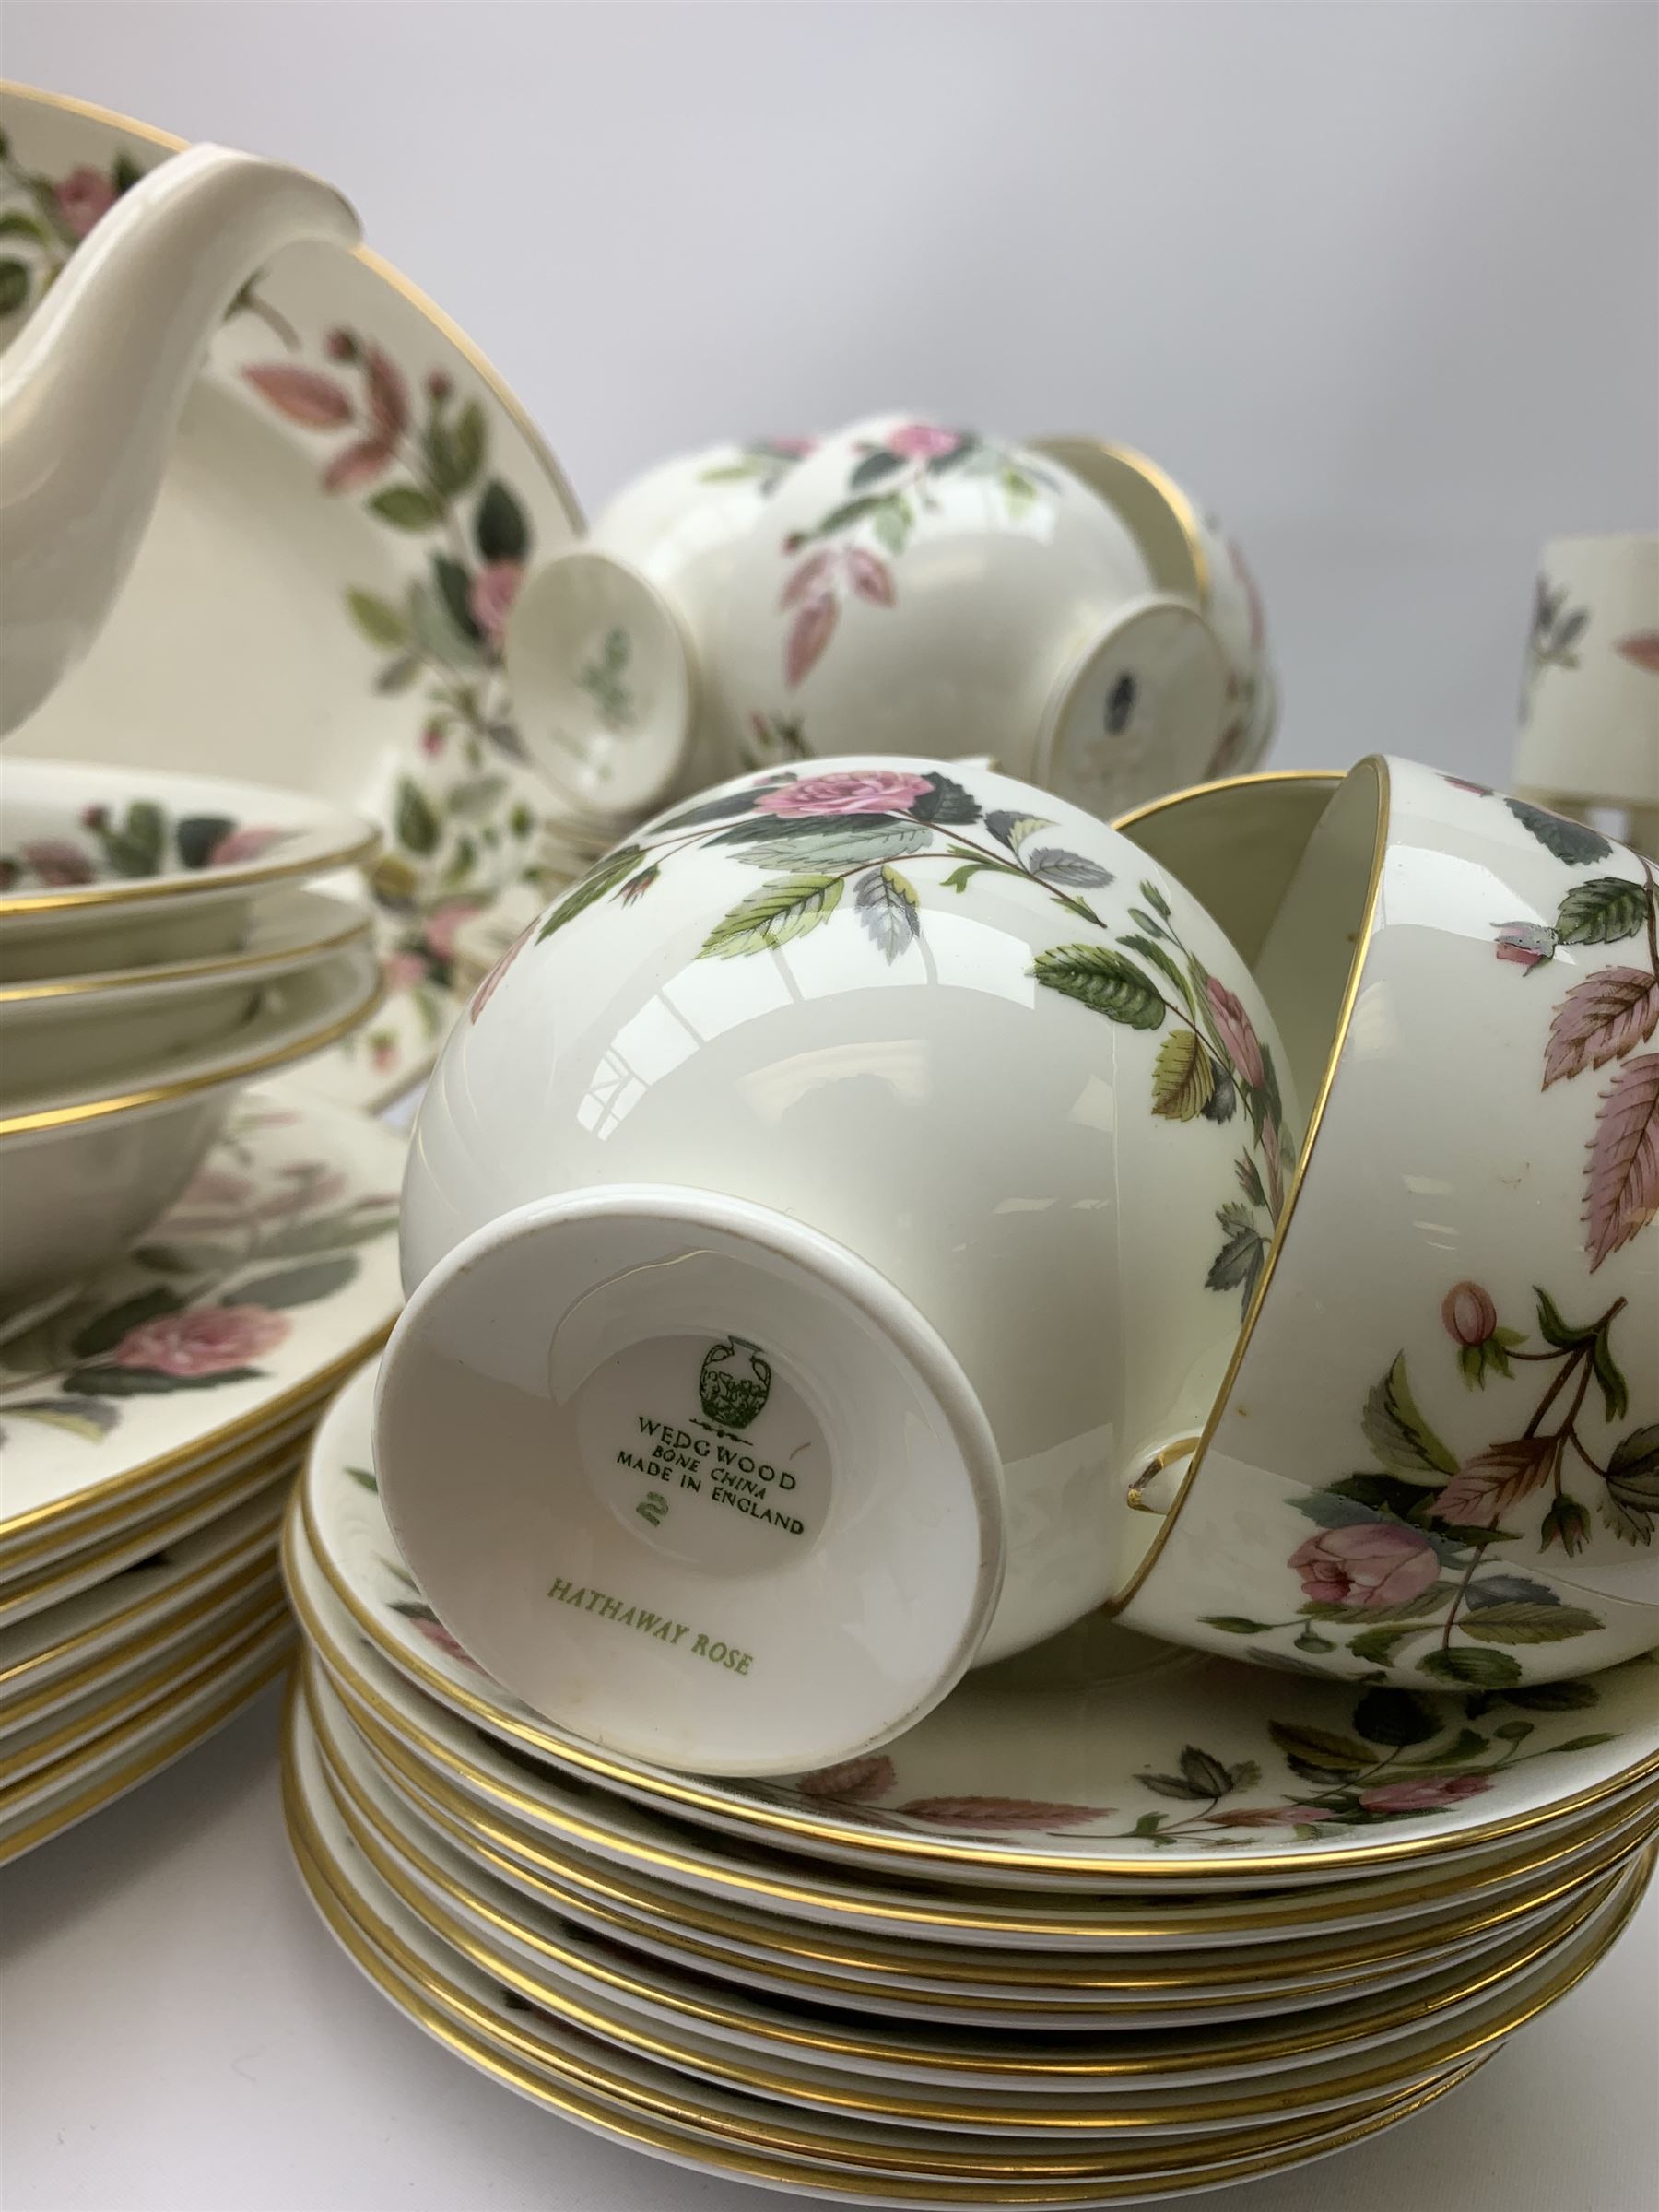 Wedgwood Hathaway Rose pattern dinner and tea wares - Image 2 of 4